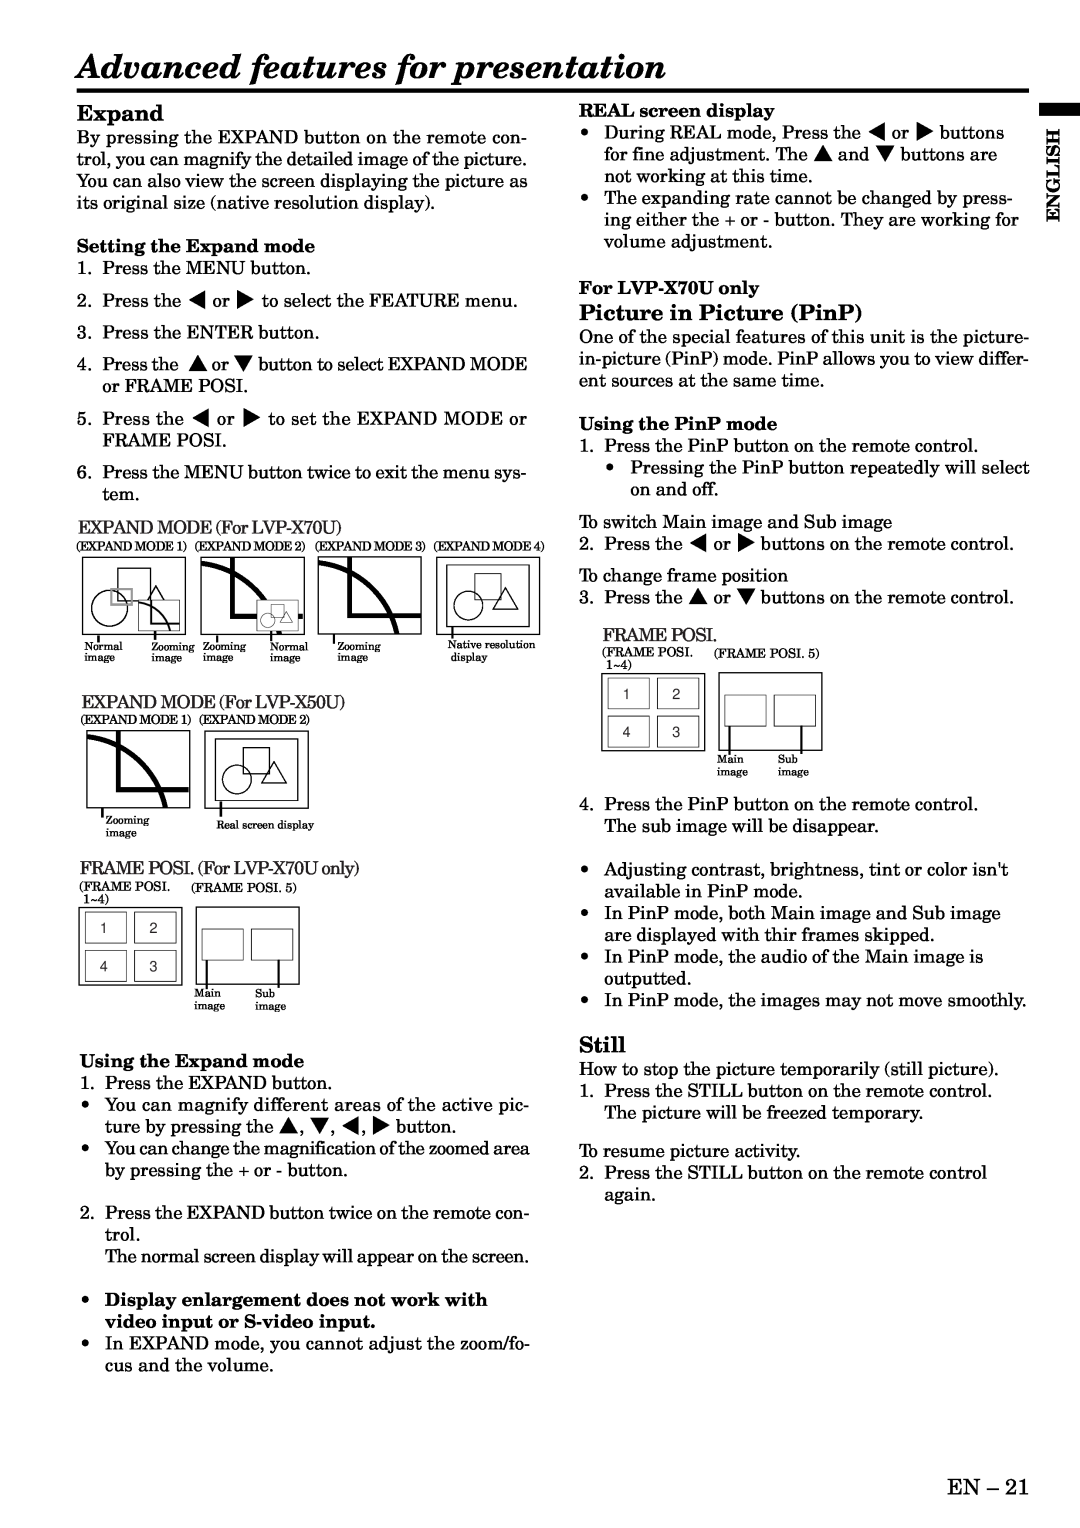 Mitsubishi Electronics X70, X50 user manual Advanced features for presentation, Expand, Picture in Picture PinP, Still 